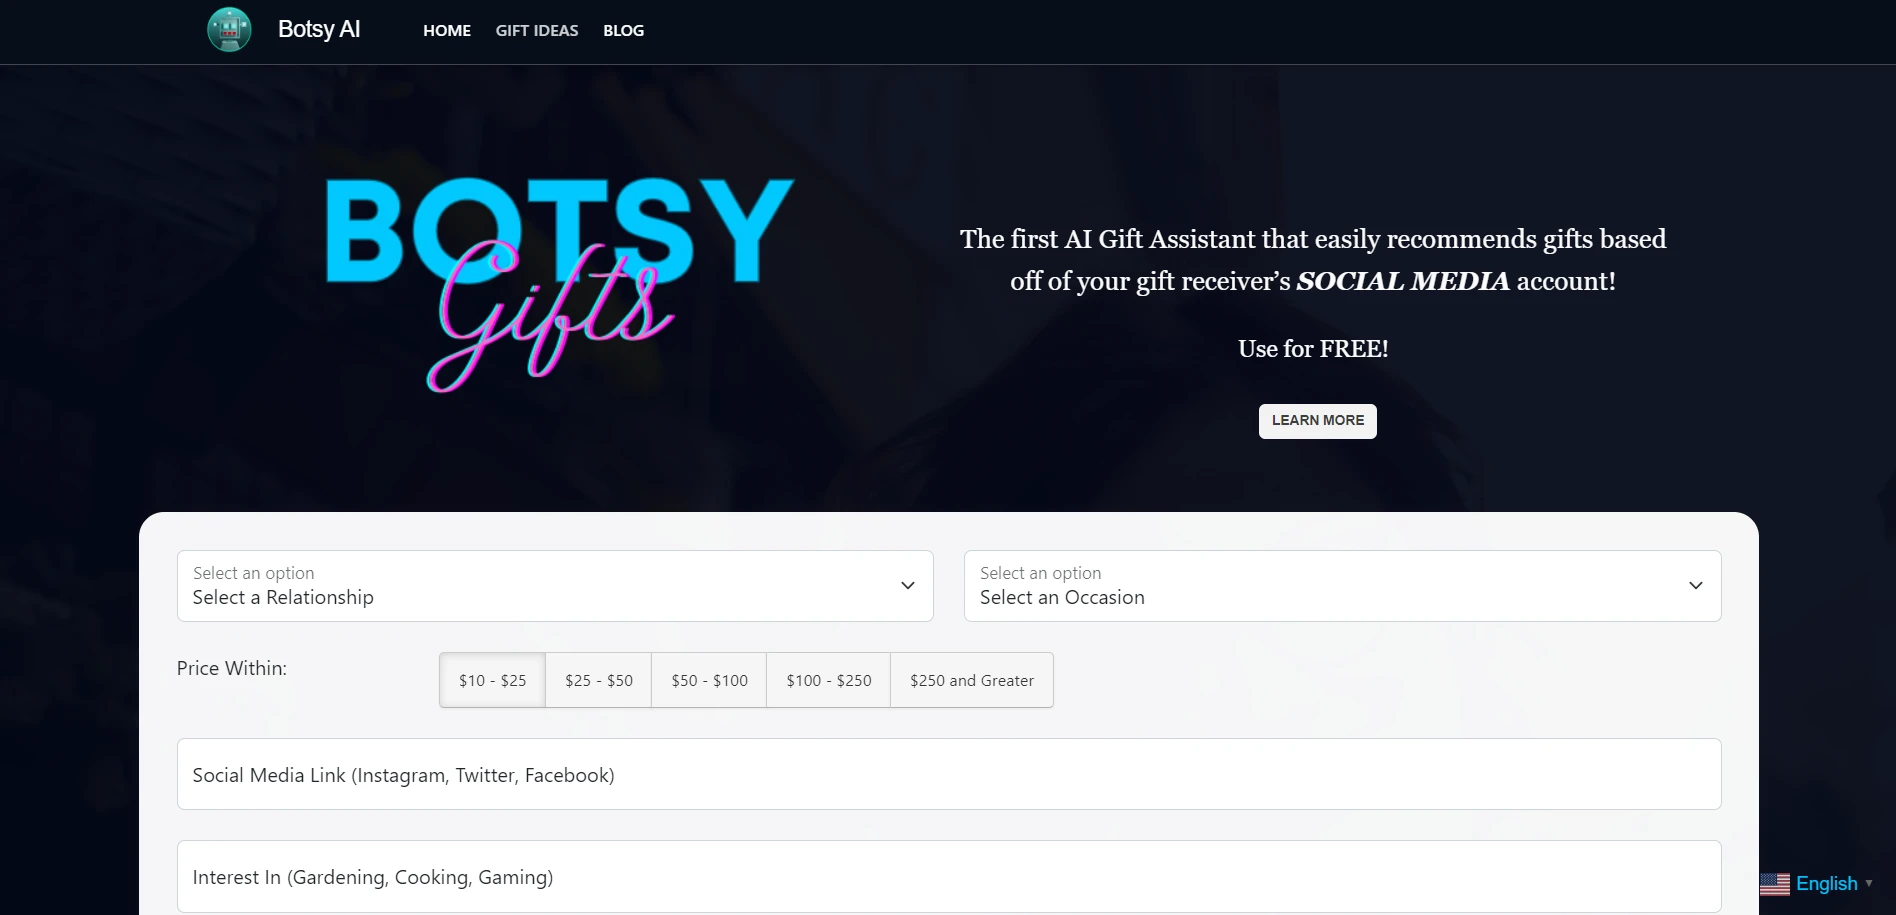 Botsy AIwebsite picture